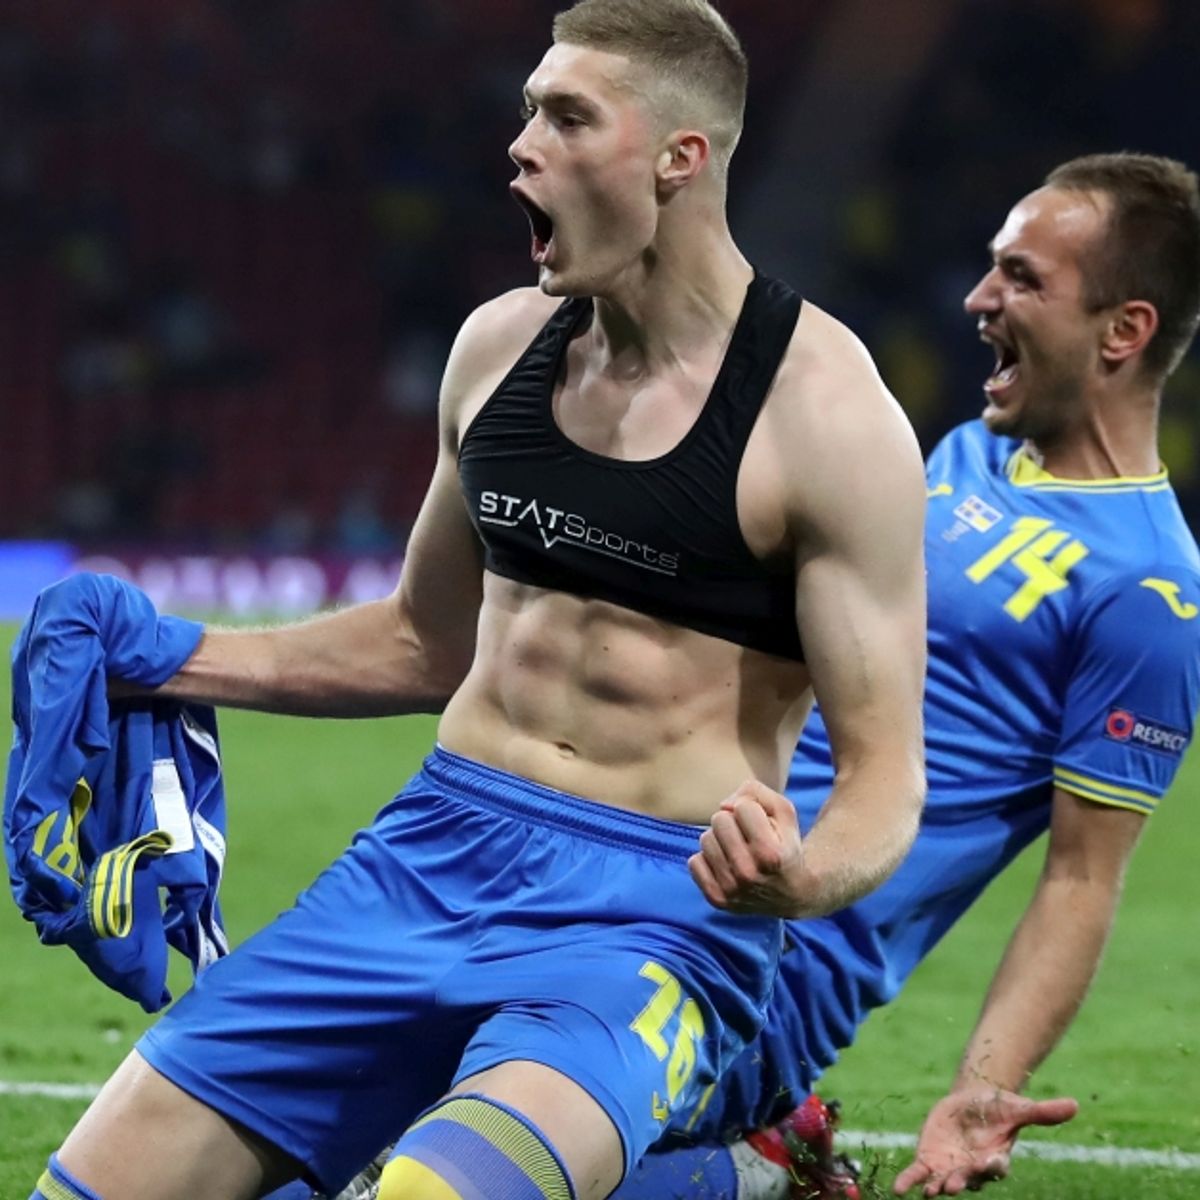 Did Men's Soccer Player Reveal Sports Bra After Game-Winning Goal